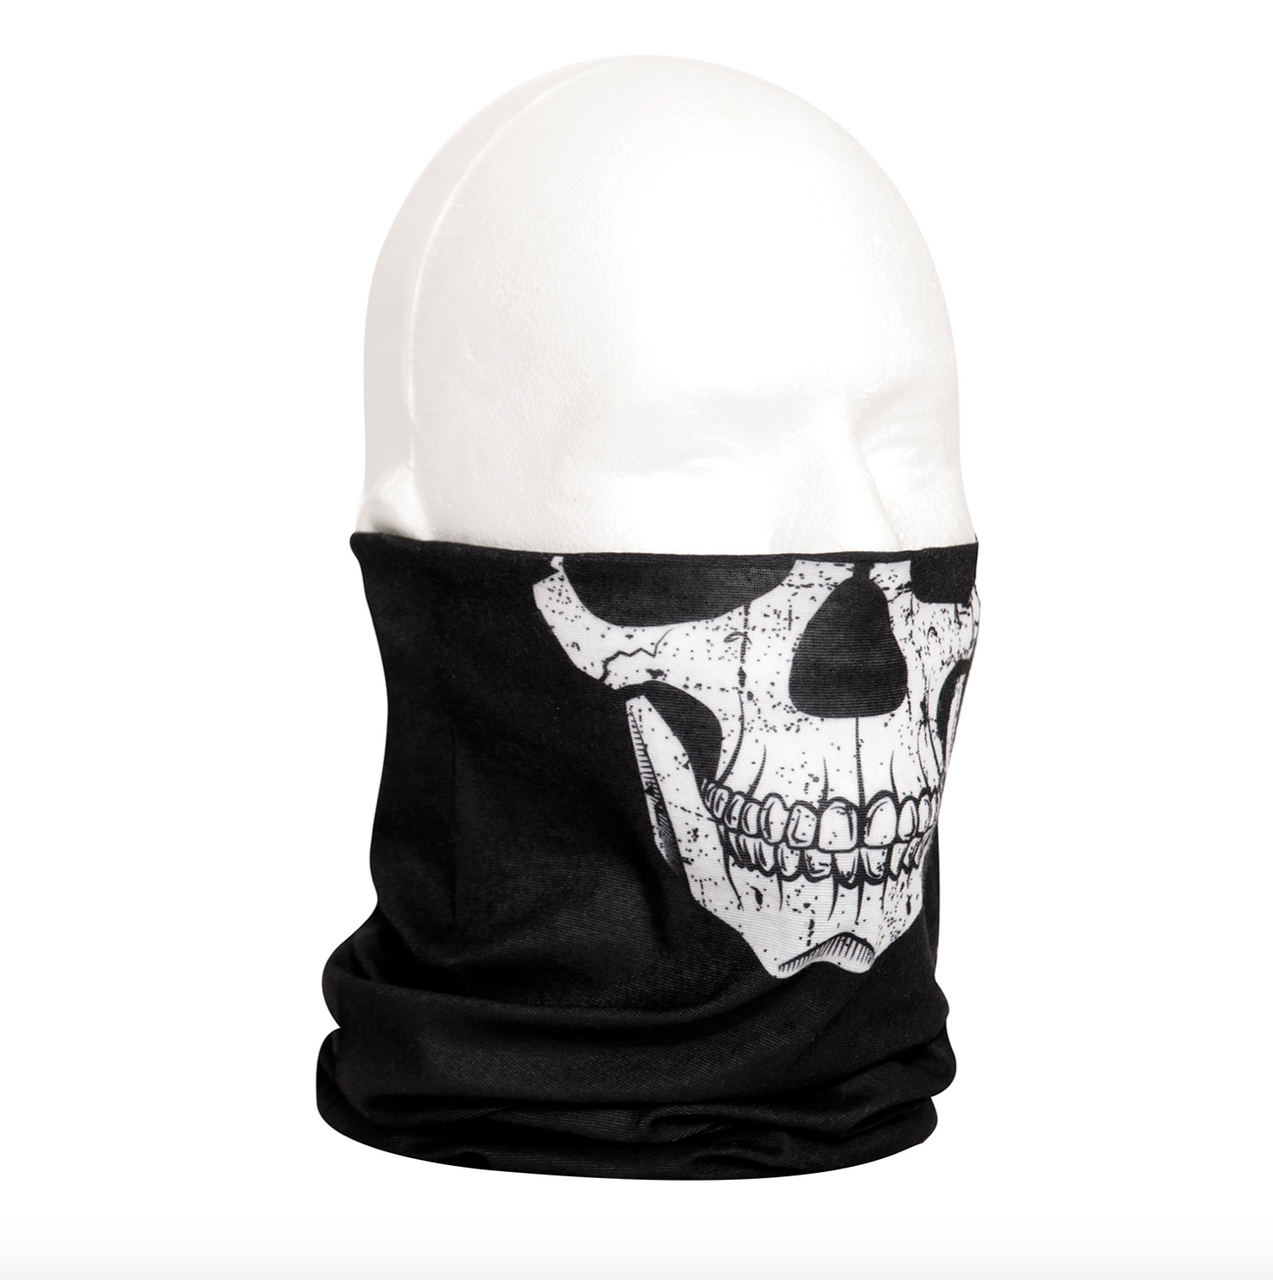 Tactical Balaclava Face Mask Skull Ghost Army Military Mask